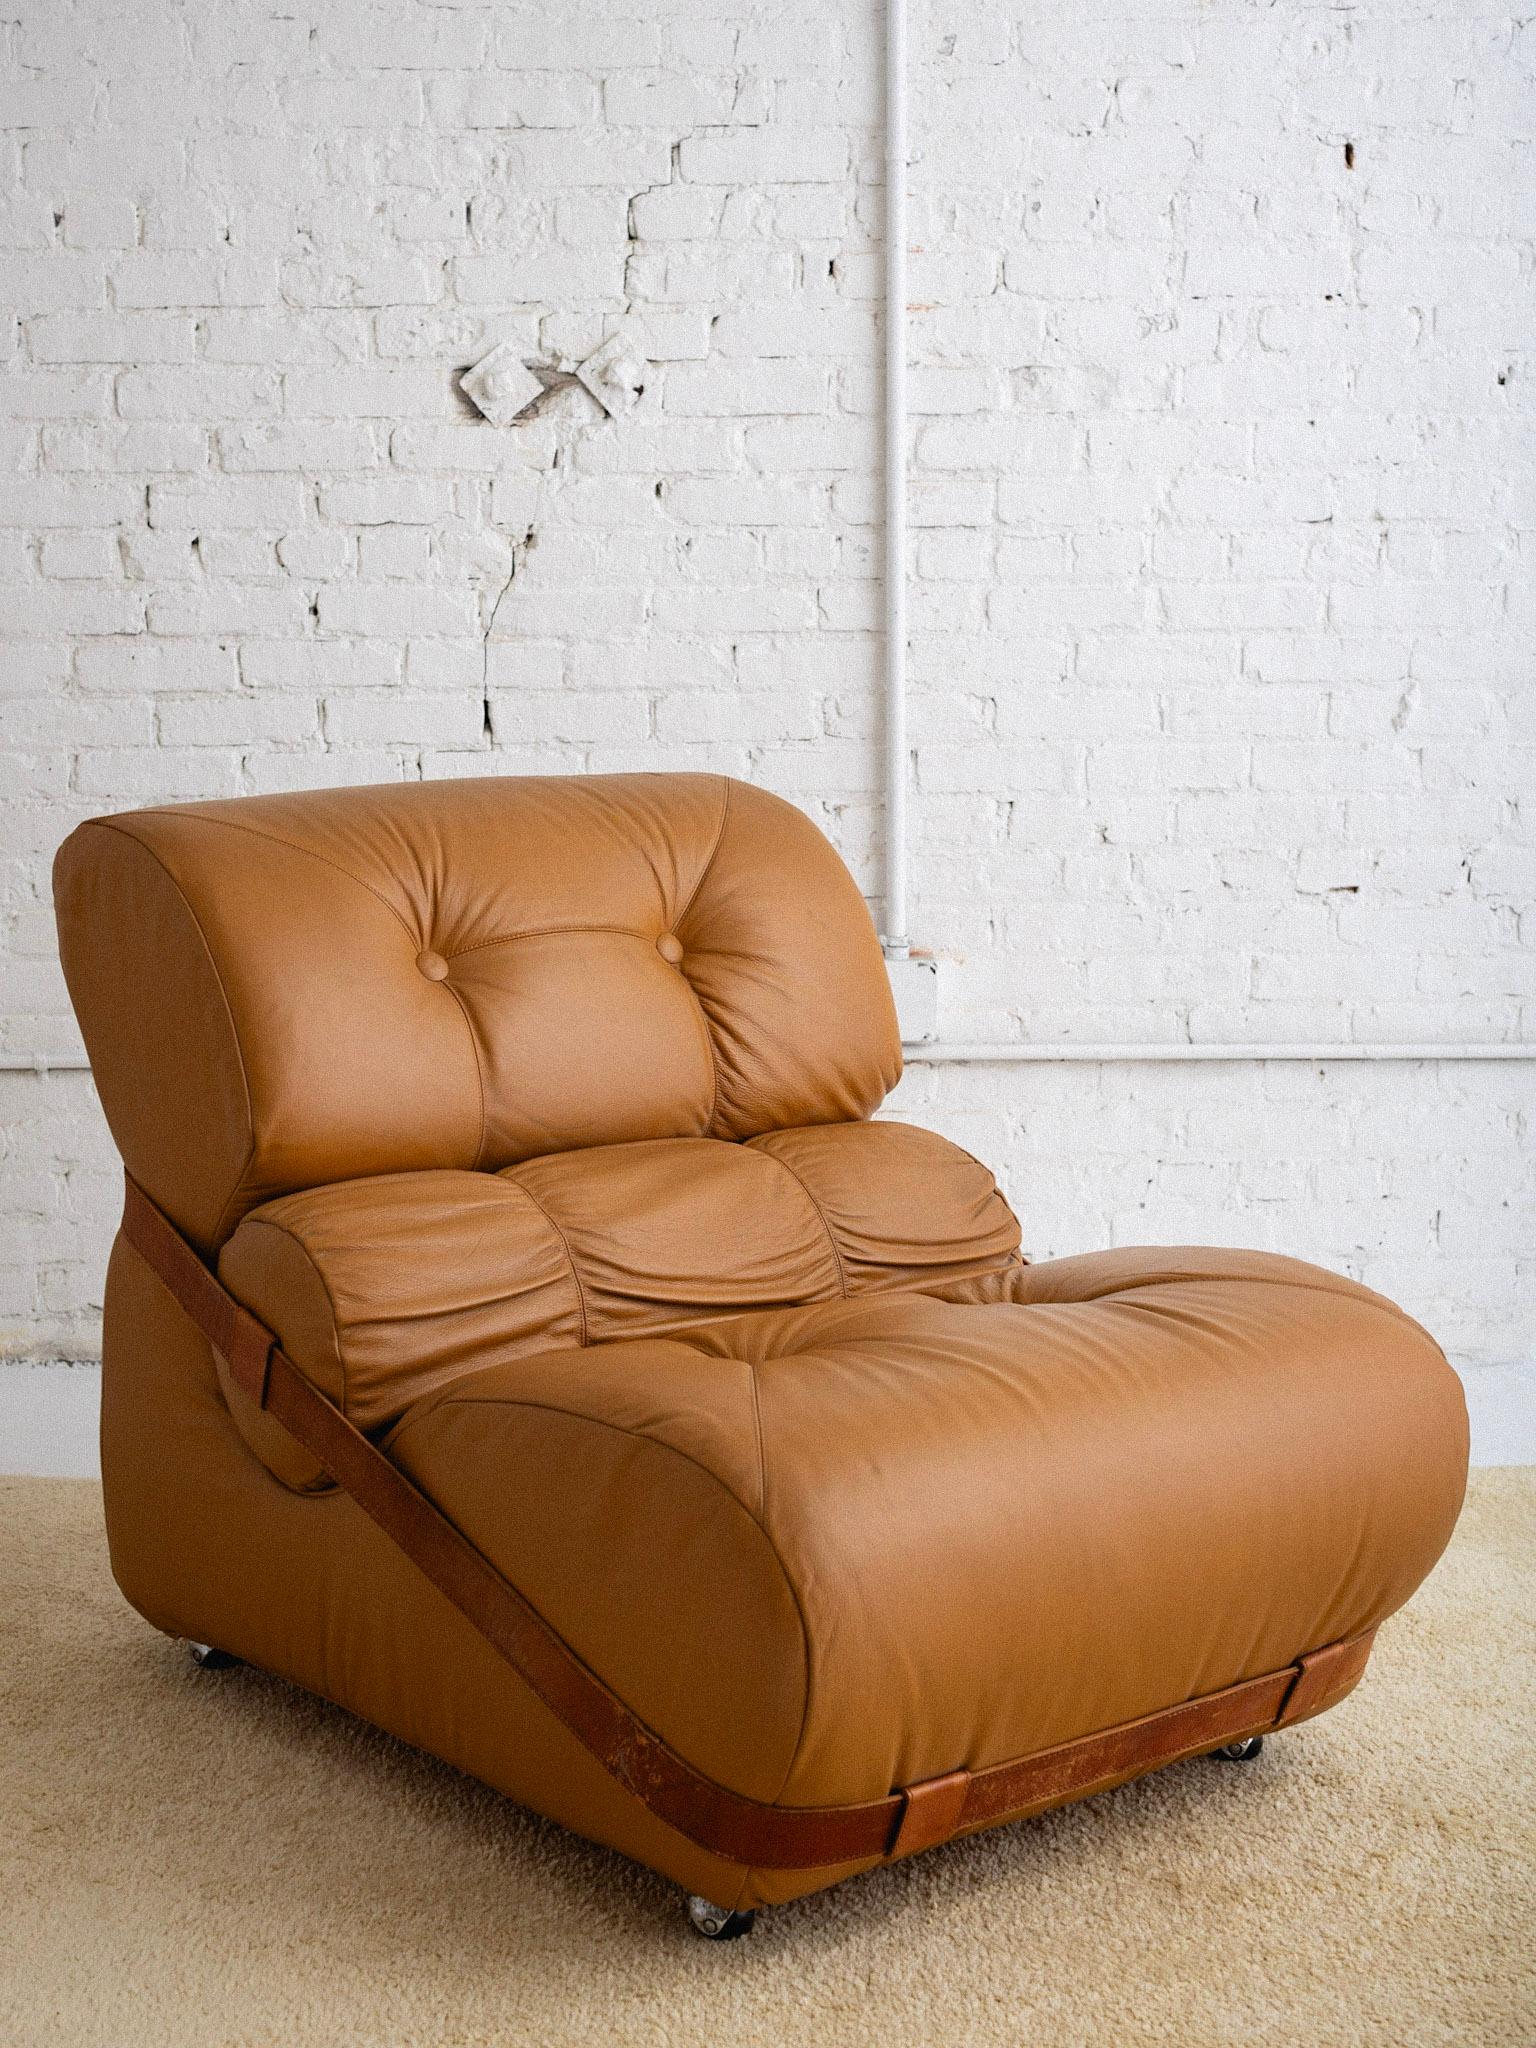 camel chair and ottoman